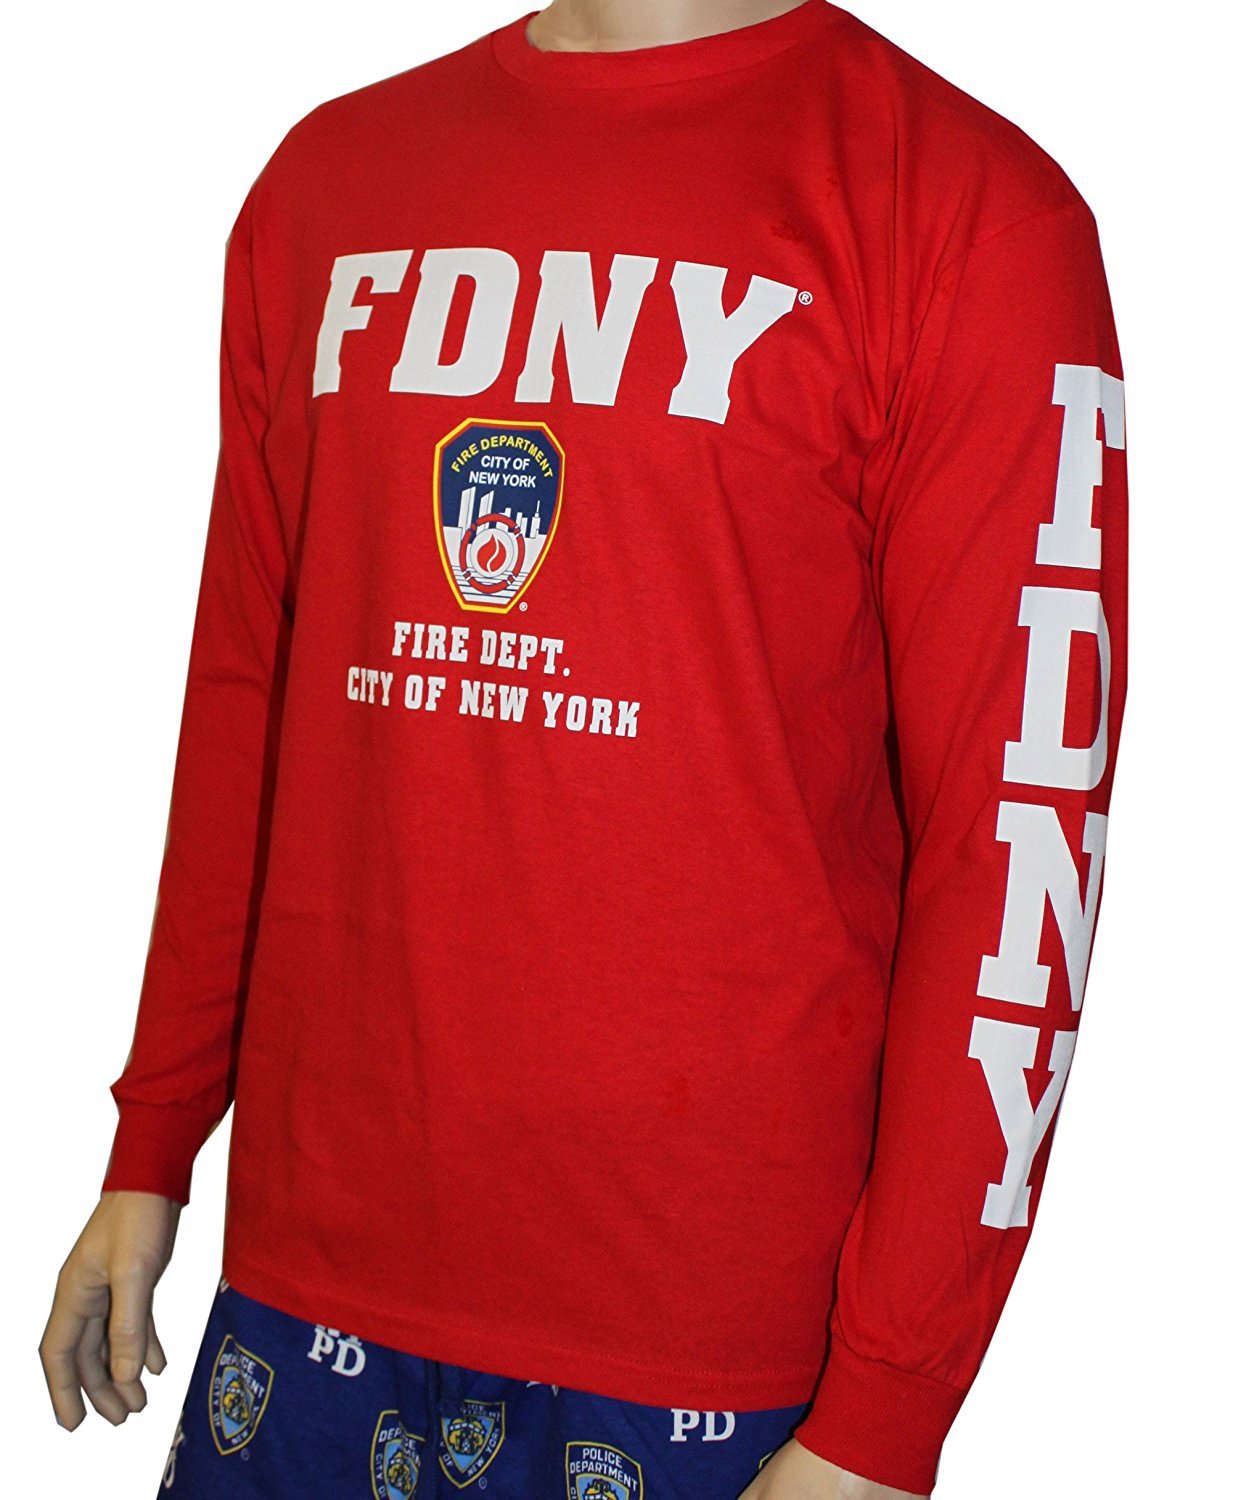 FDNY Long Sleeve Fire Dept Licensed T-Shirt Red